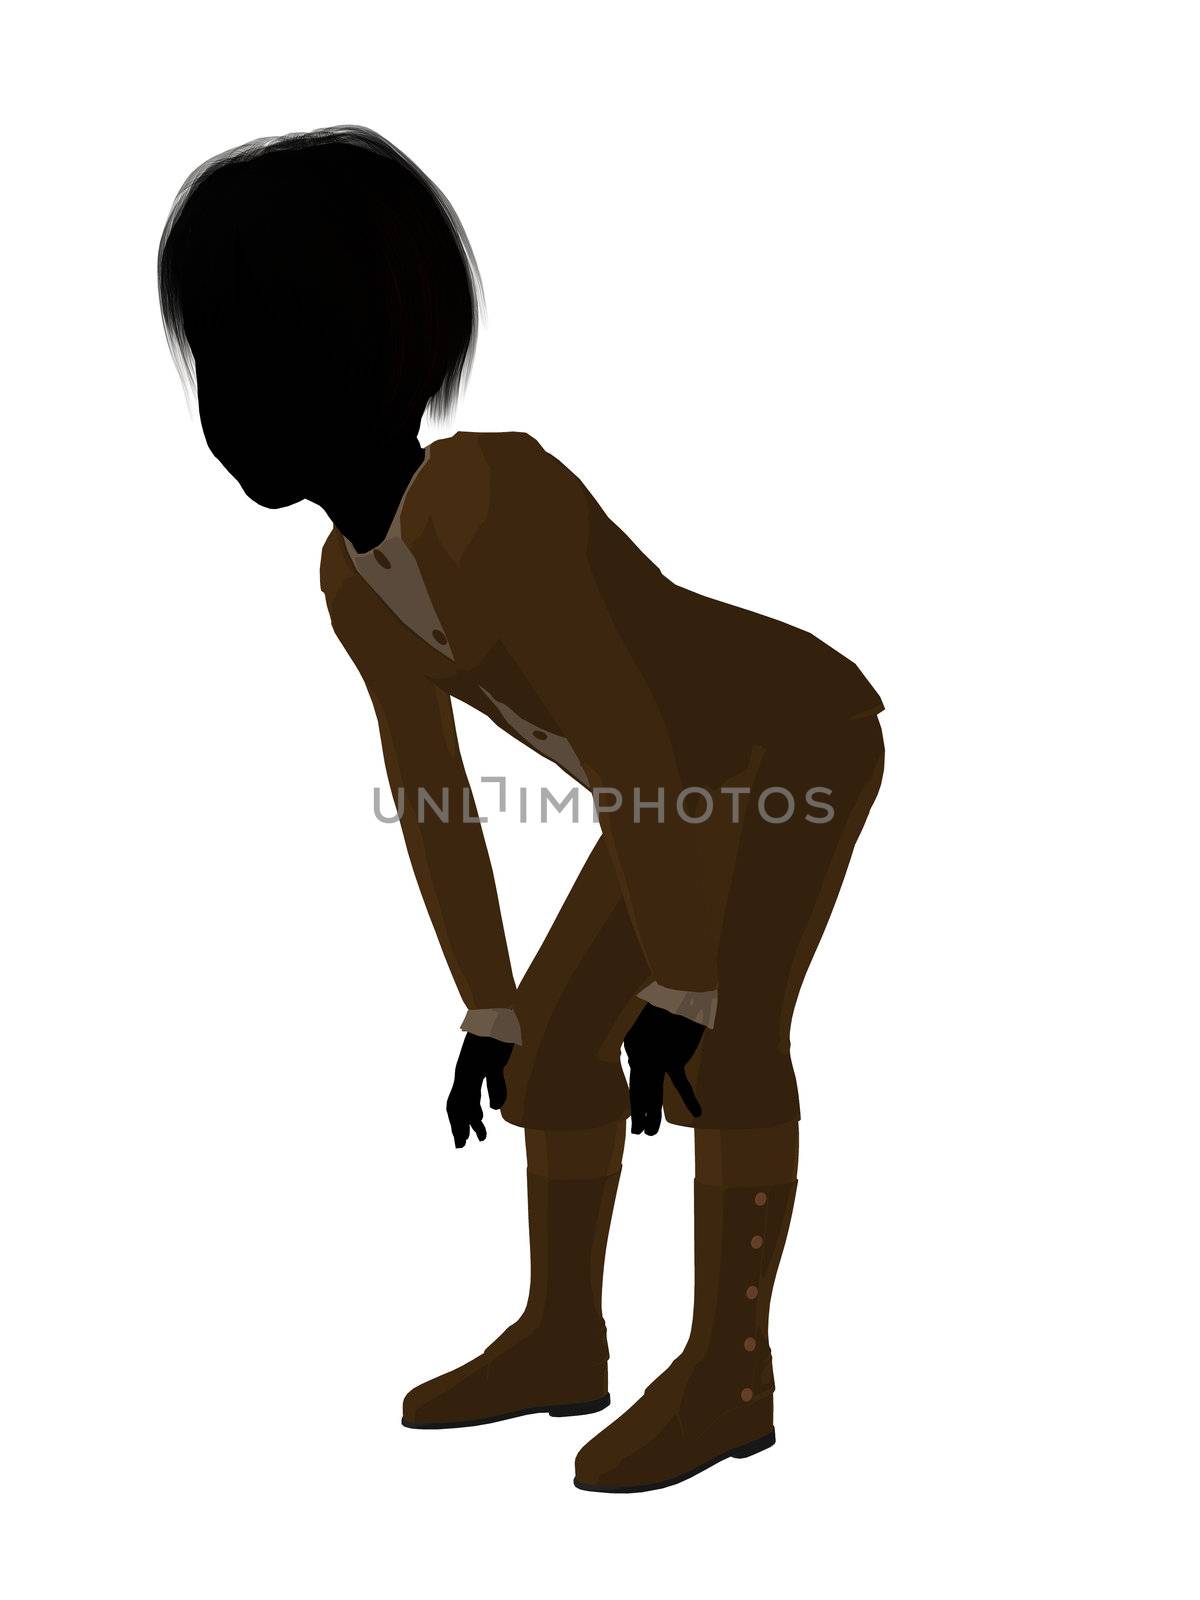 Victorian boy silhouette on a white background